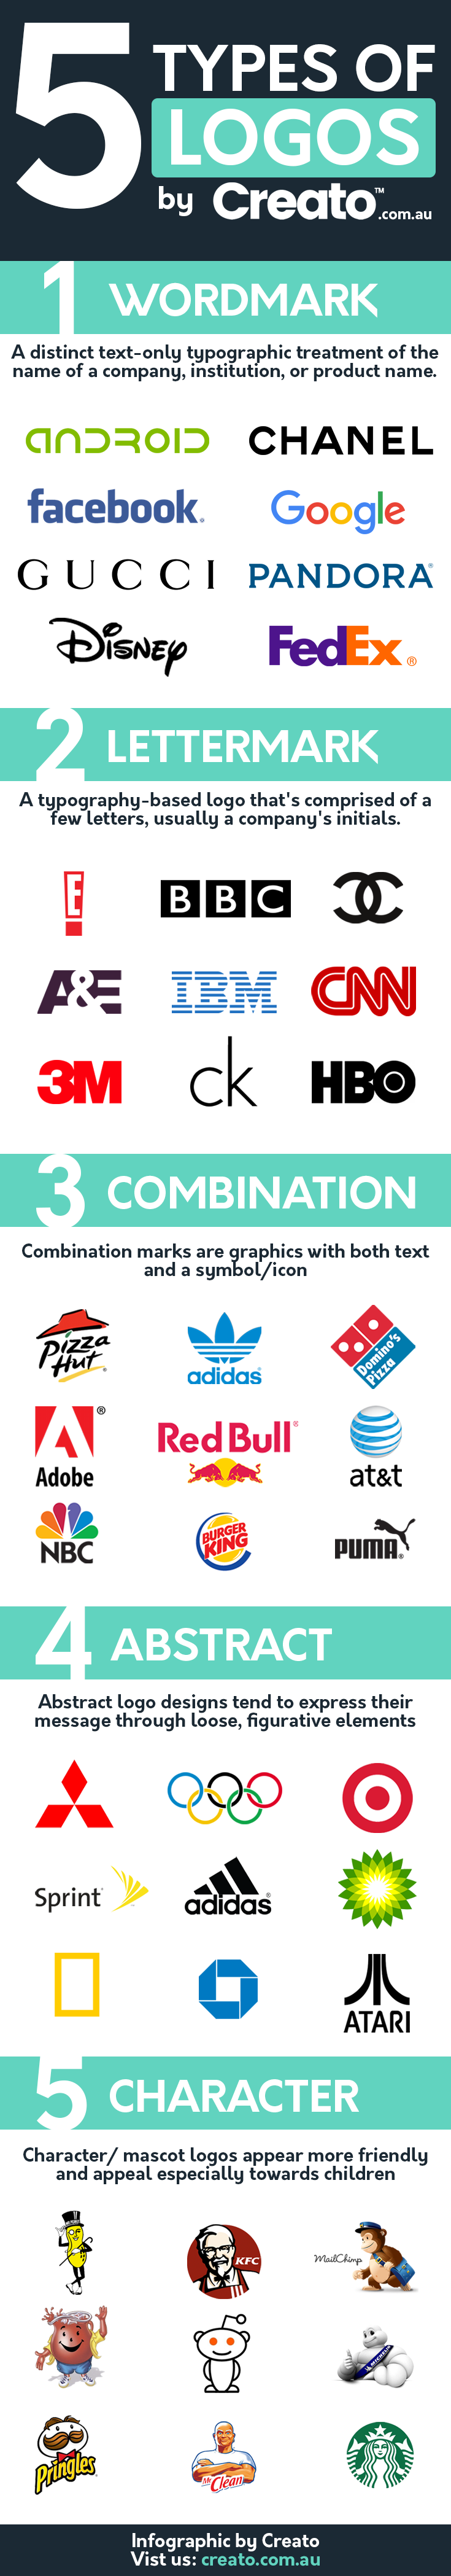 Everything you need to know about the 5 types of logo.